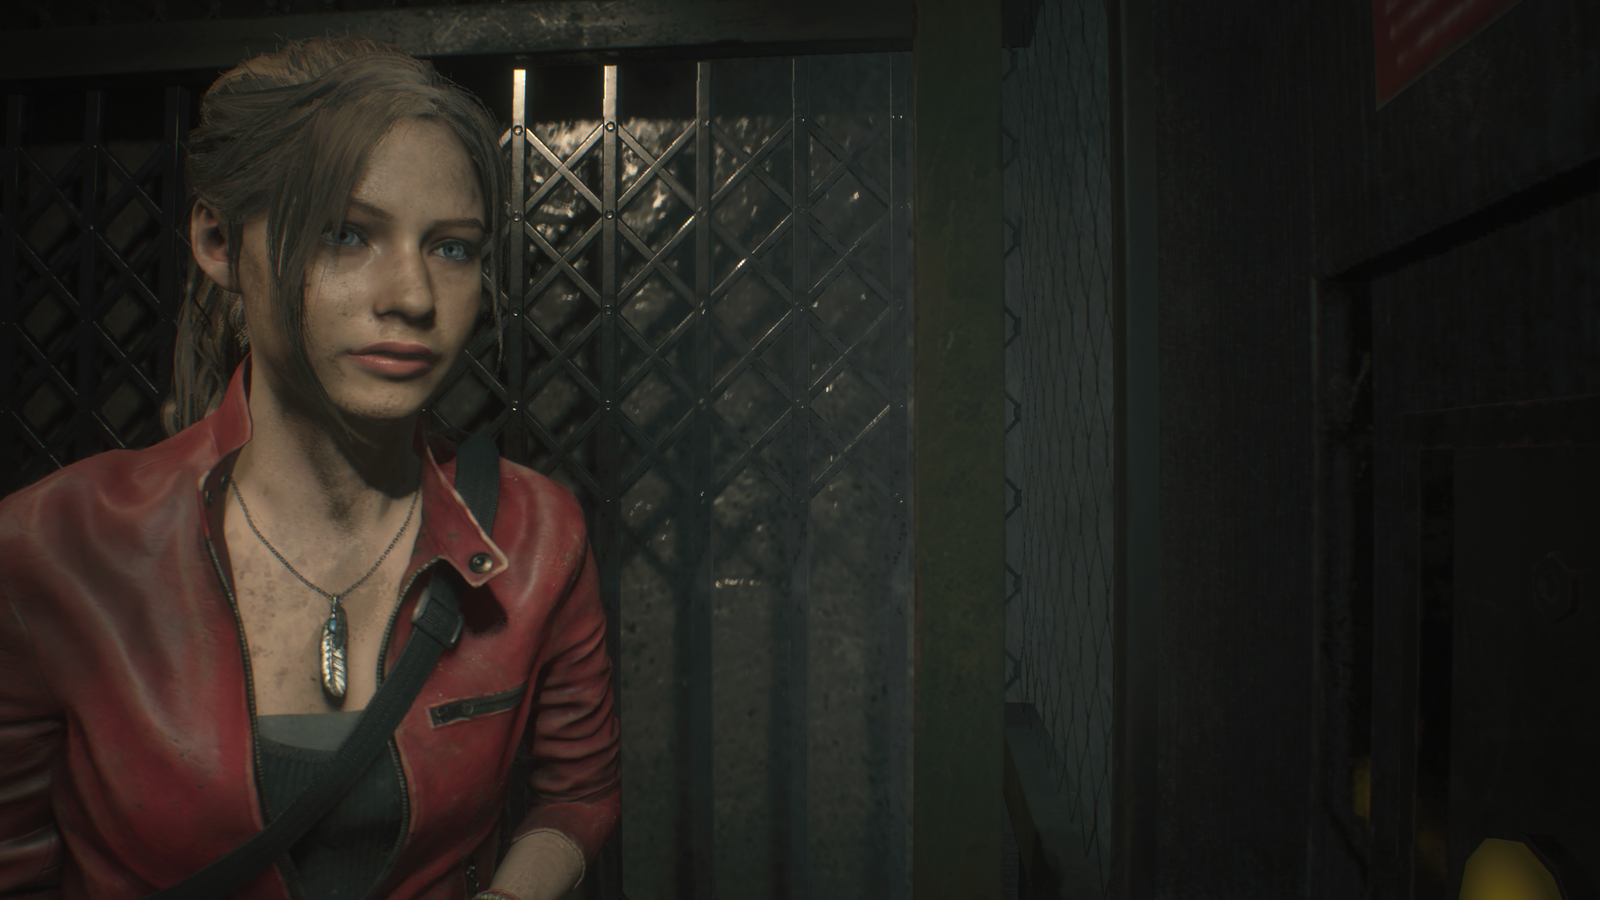 RESIDENT EVIL 2 (2019)] Mr. X's heart is visible under his